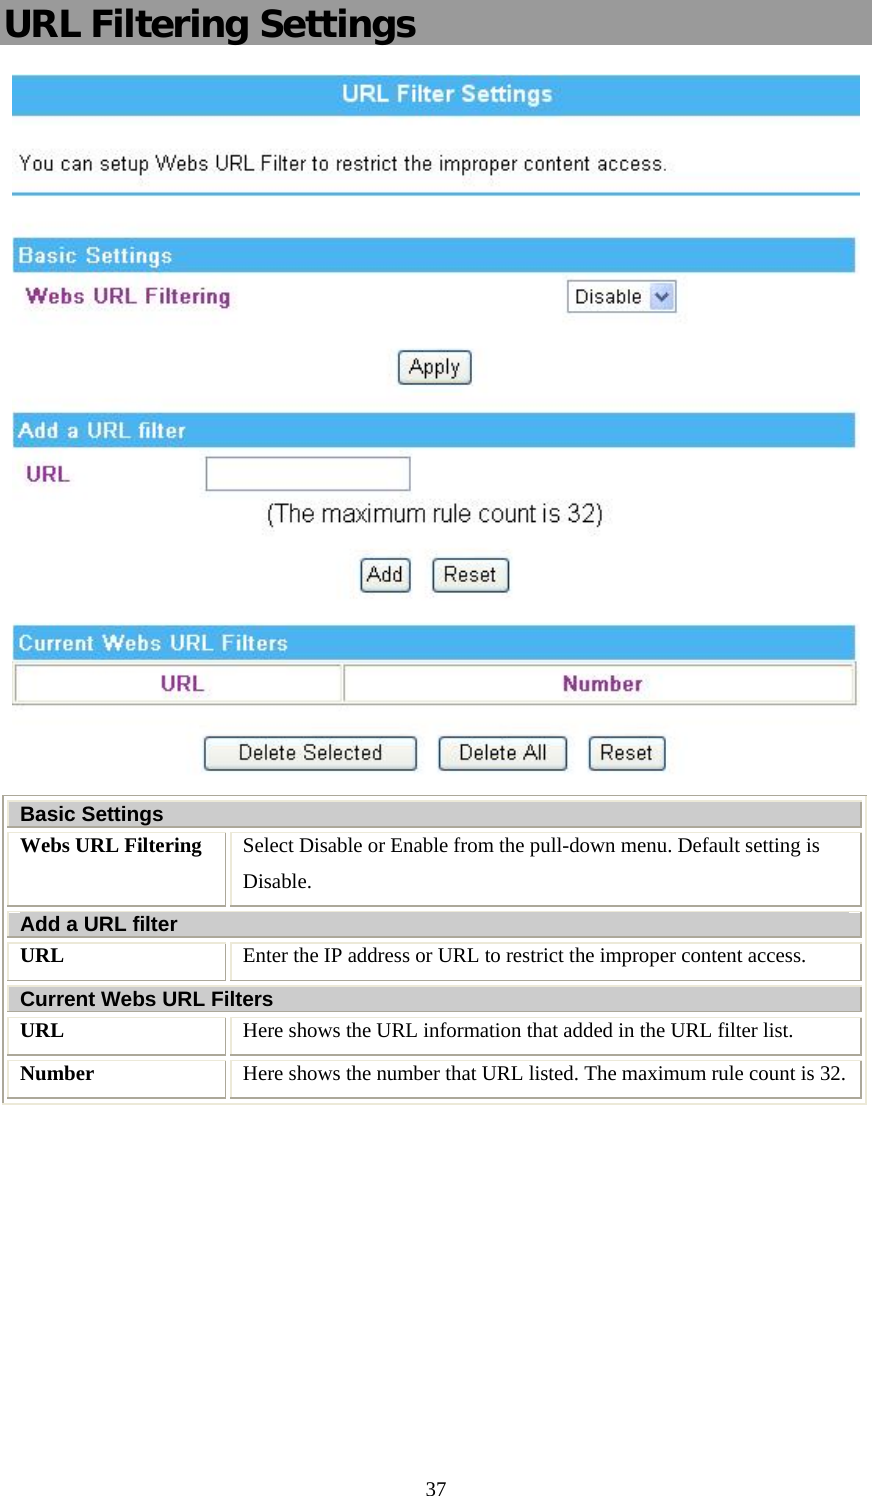   37URL Filtering Settings  Basic Settings Webs URL Filtering  Select Disable or Enable from the pull-down menu. Default setting is Disable.  Add a URL filter URL  Enter the IP address or URL to restrict the improper content access.  Current Webs URL Filters URL  Here shows the URL information that added in the URL filter list. Number   Here shows the number that URL listed. The maximum rule count is 32.    